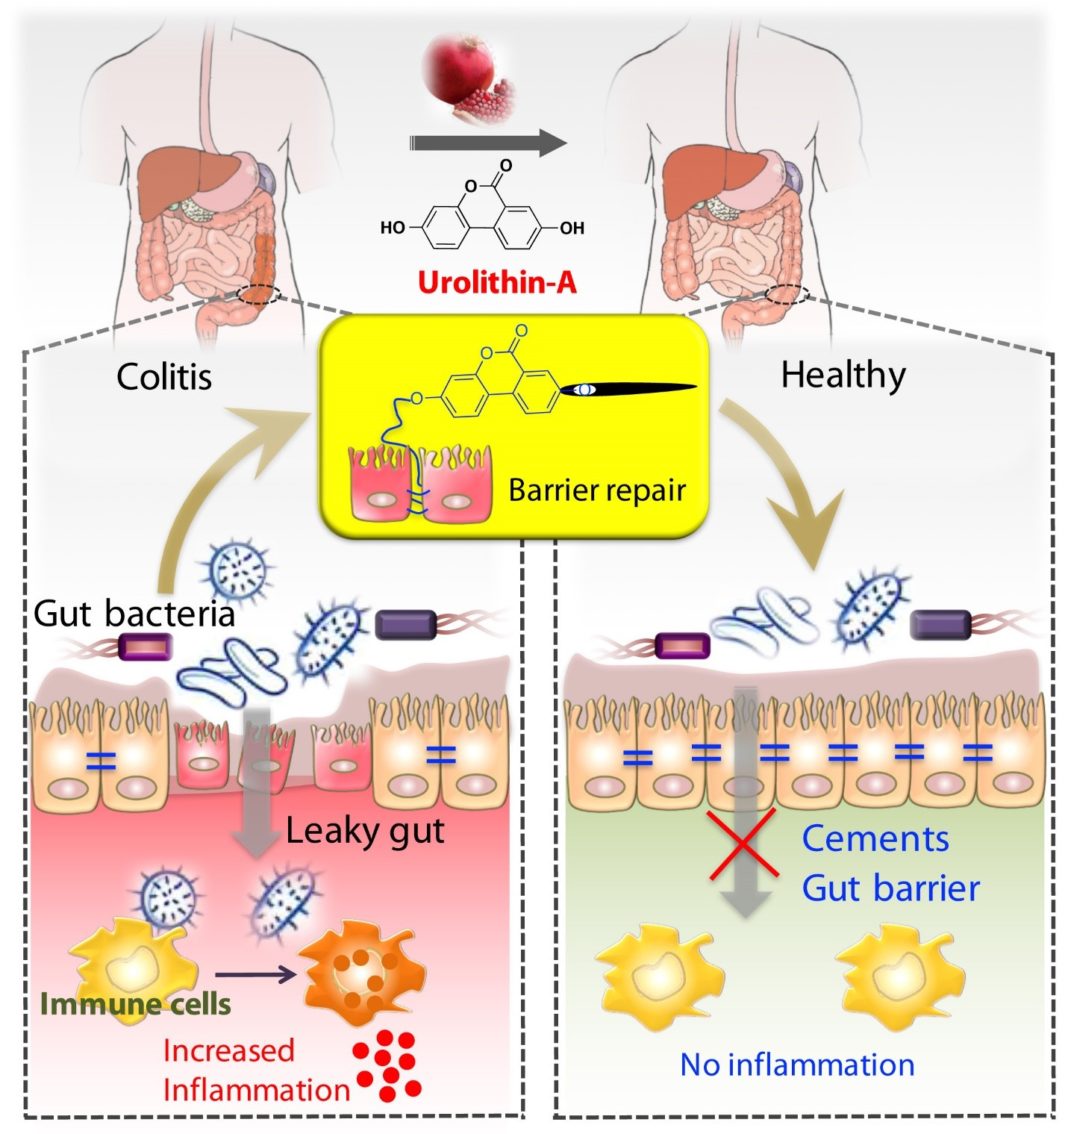 Illustration showing tightening of gut barrier cells and reduced inflammation due to UroA, by Praveen Kumar Vemula, Ph.D., Institute for Stem Cell Biology and Regenerative Medicine, India, and Venkatakrishna Jala, Ph.D., UofL